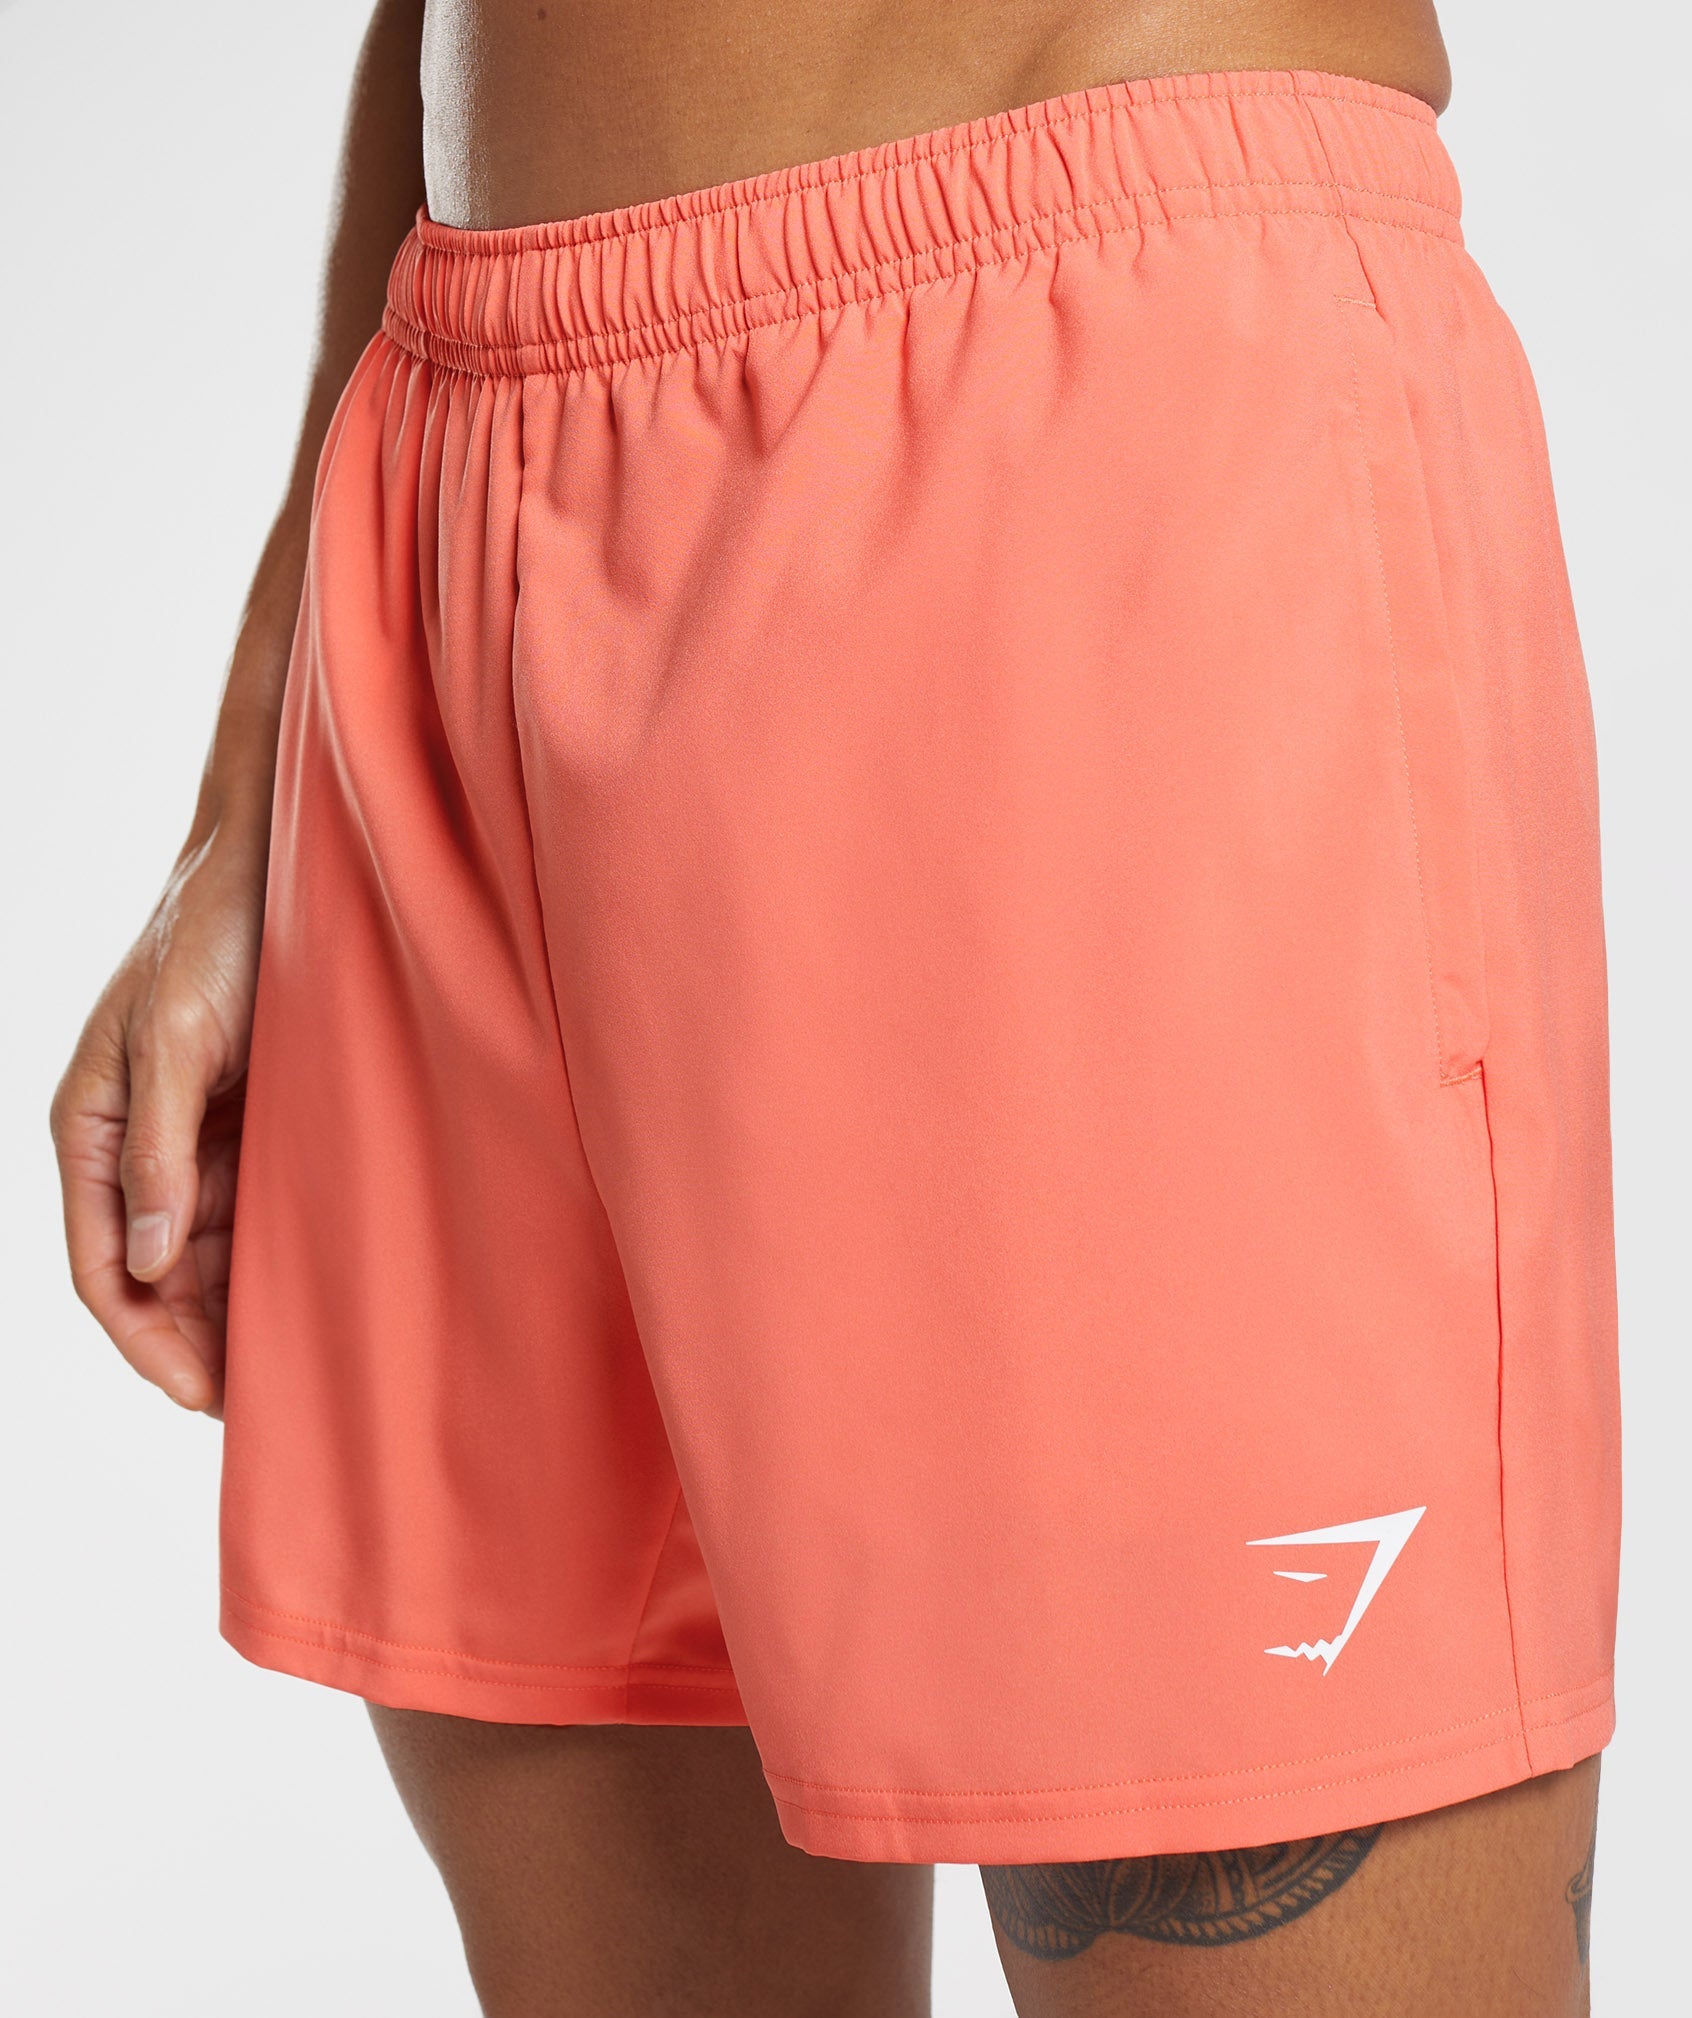 Arrival 5" Shorts in Aerospace Orange - view 3